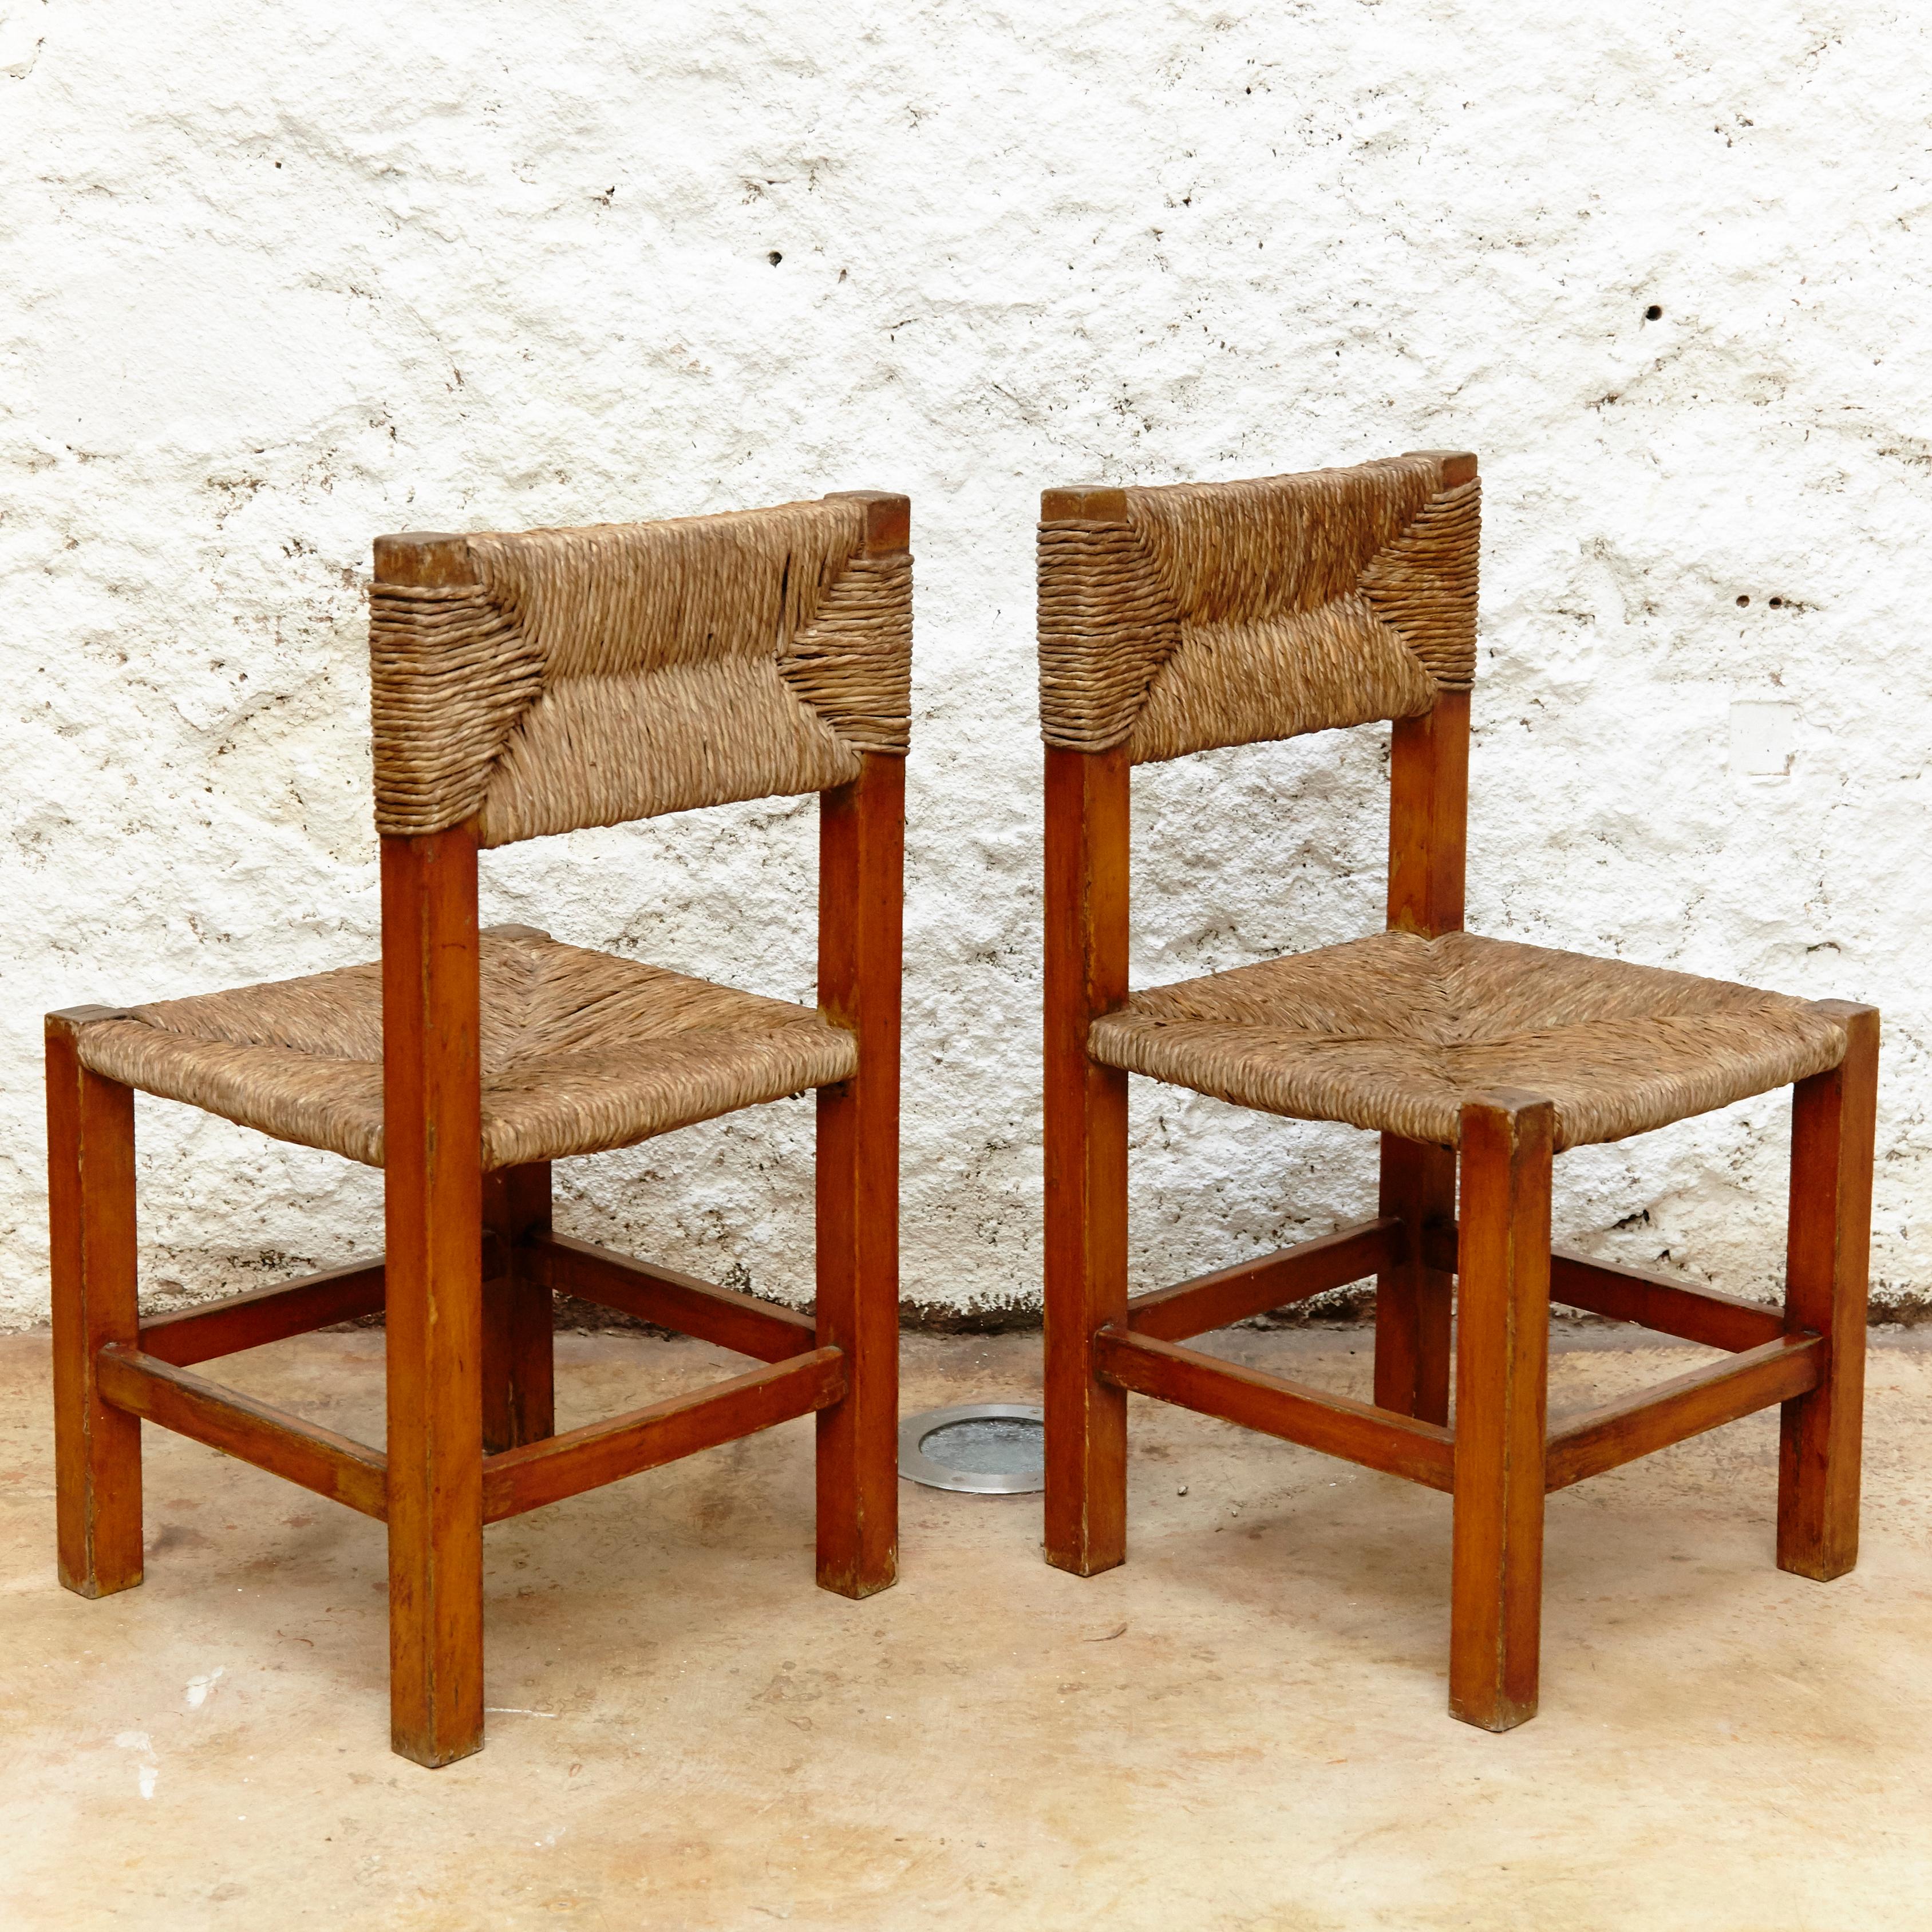 French Set of Four Chairs after Charlotte Perriand in Wood and Rattan, circa 1950